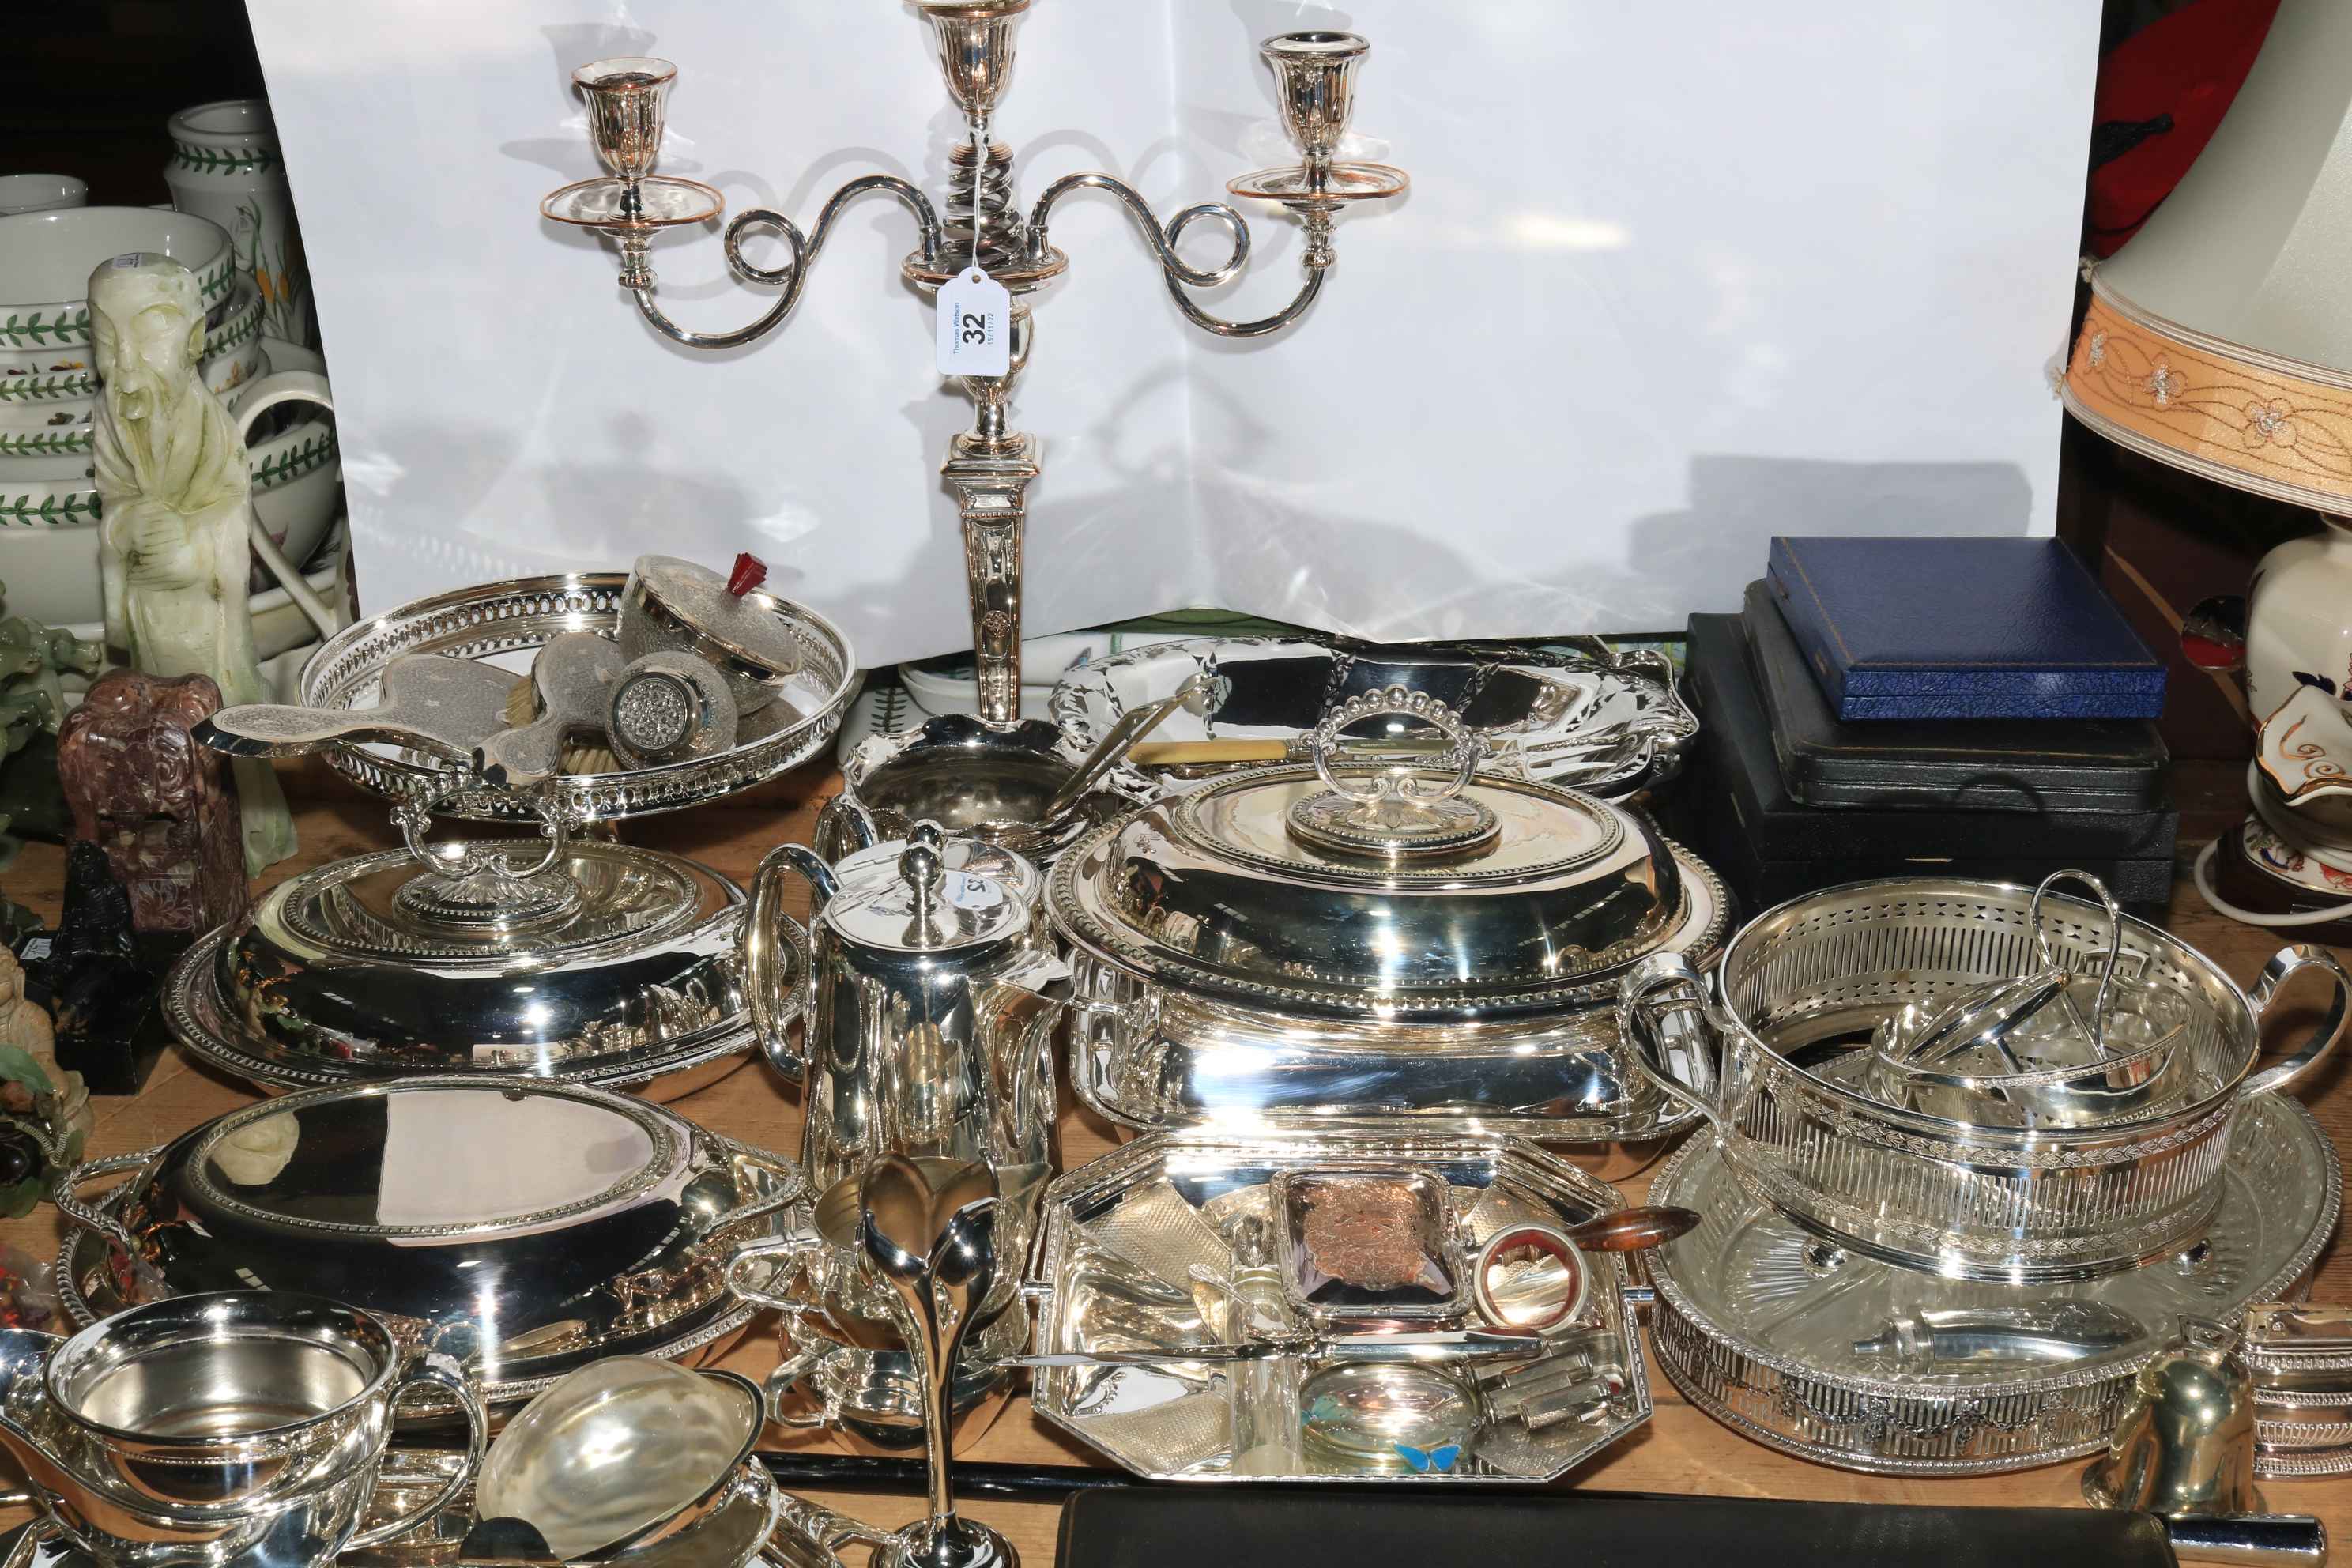 Collection of silver plated wares including cased cutlery, tureens, candelabra, etc.